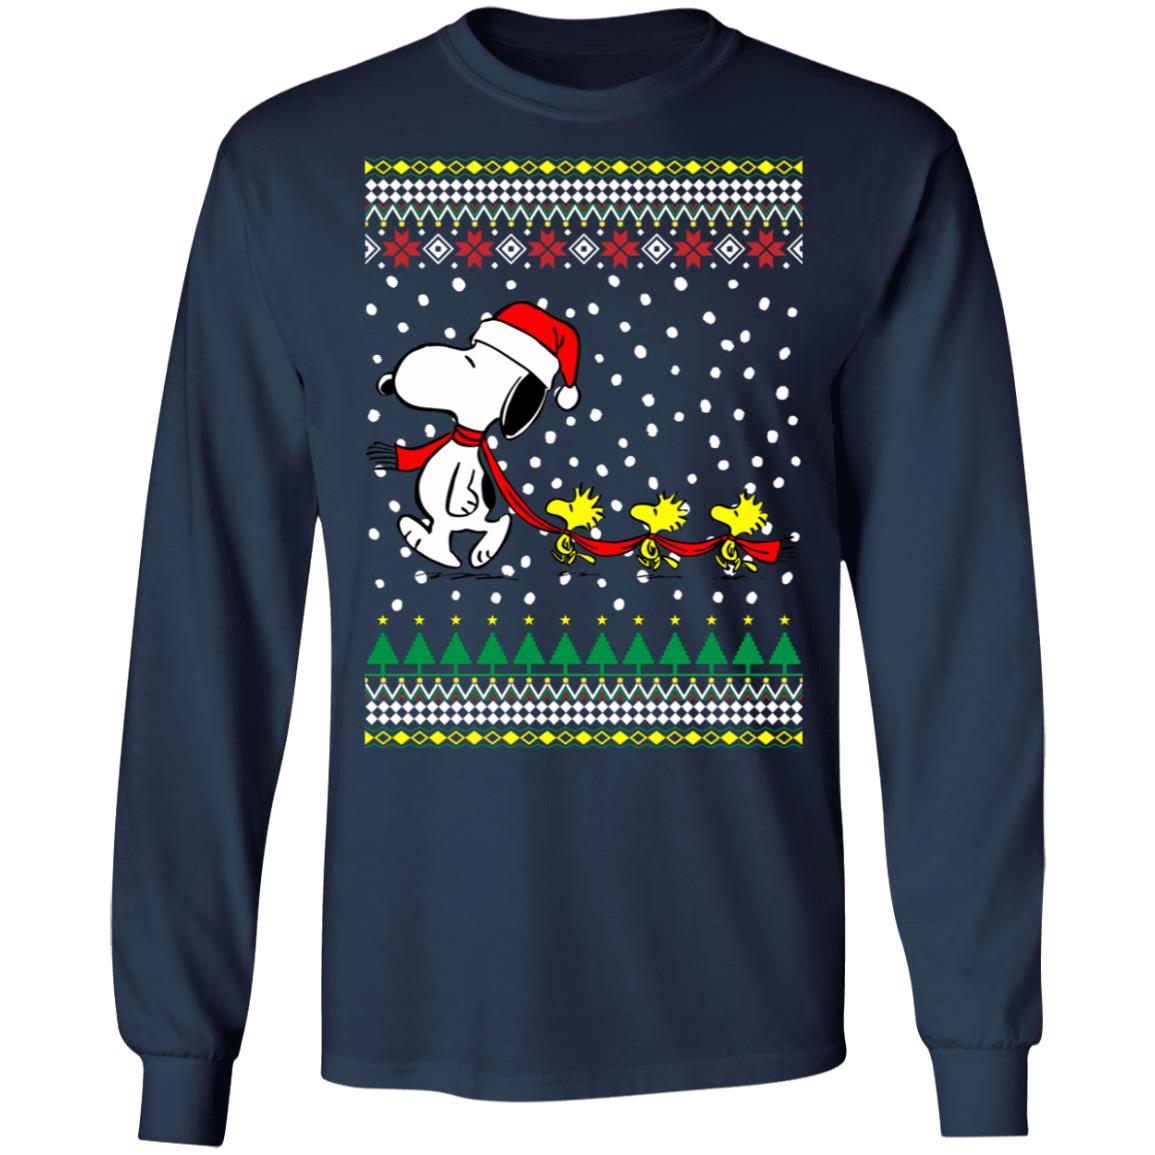 Snoopy and Woodstock Ugly Christmas Sweater